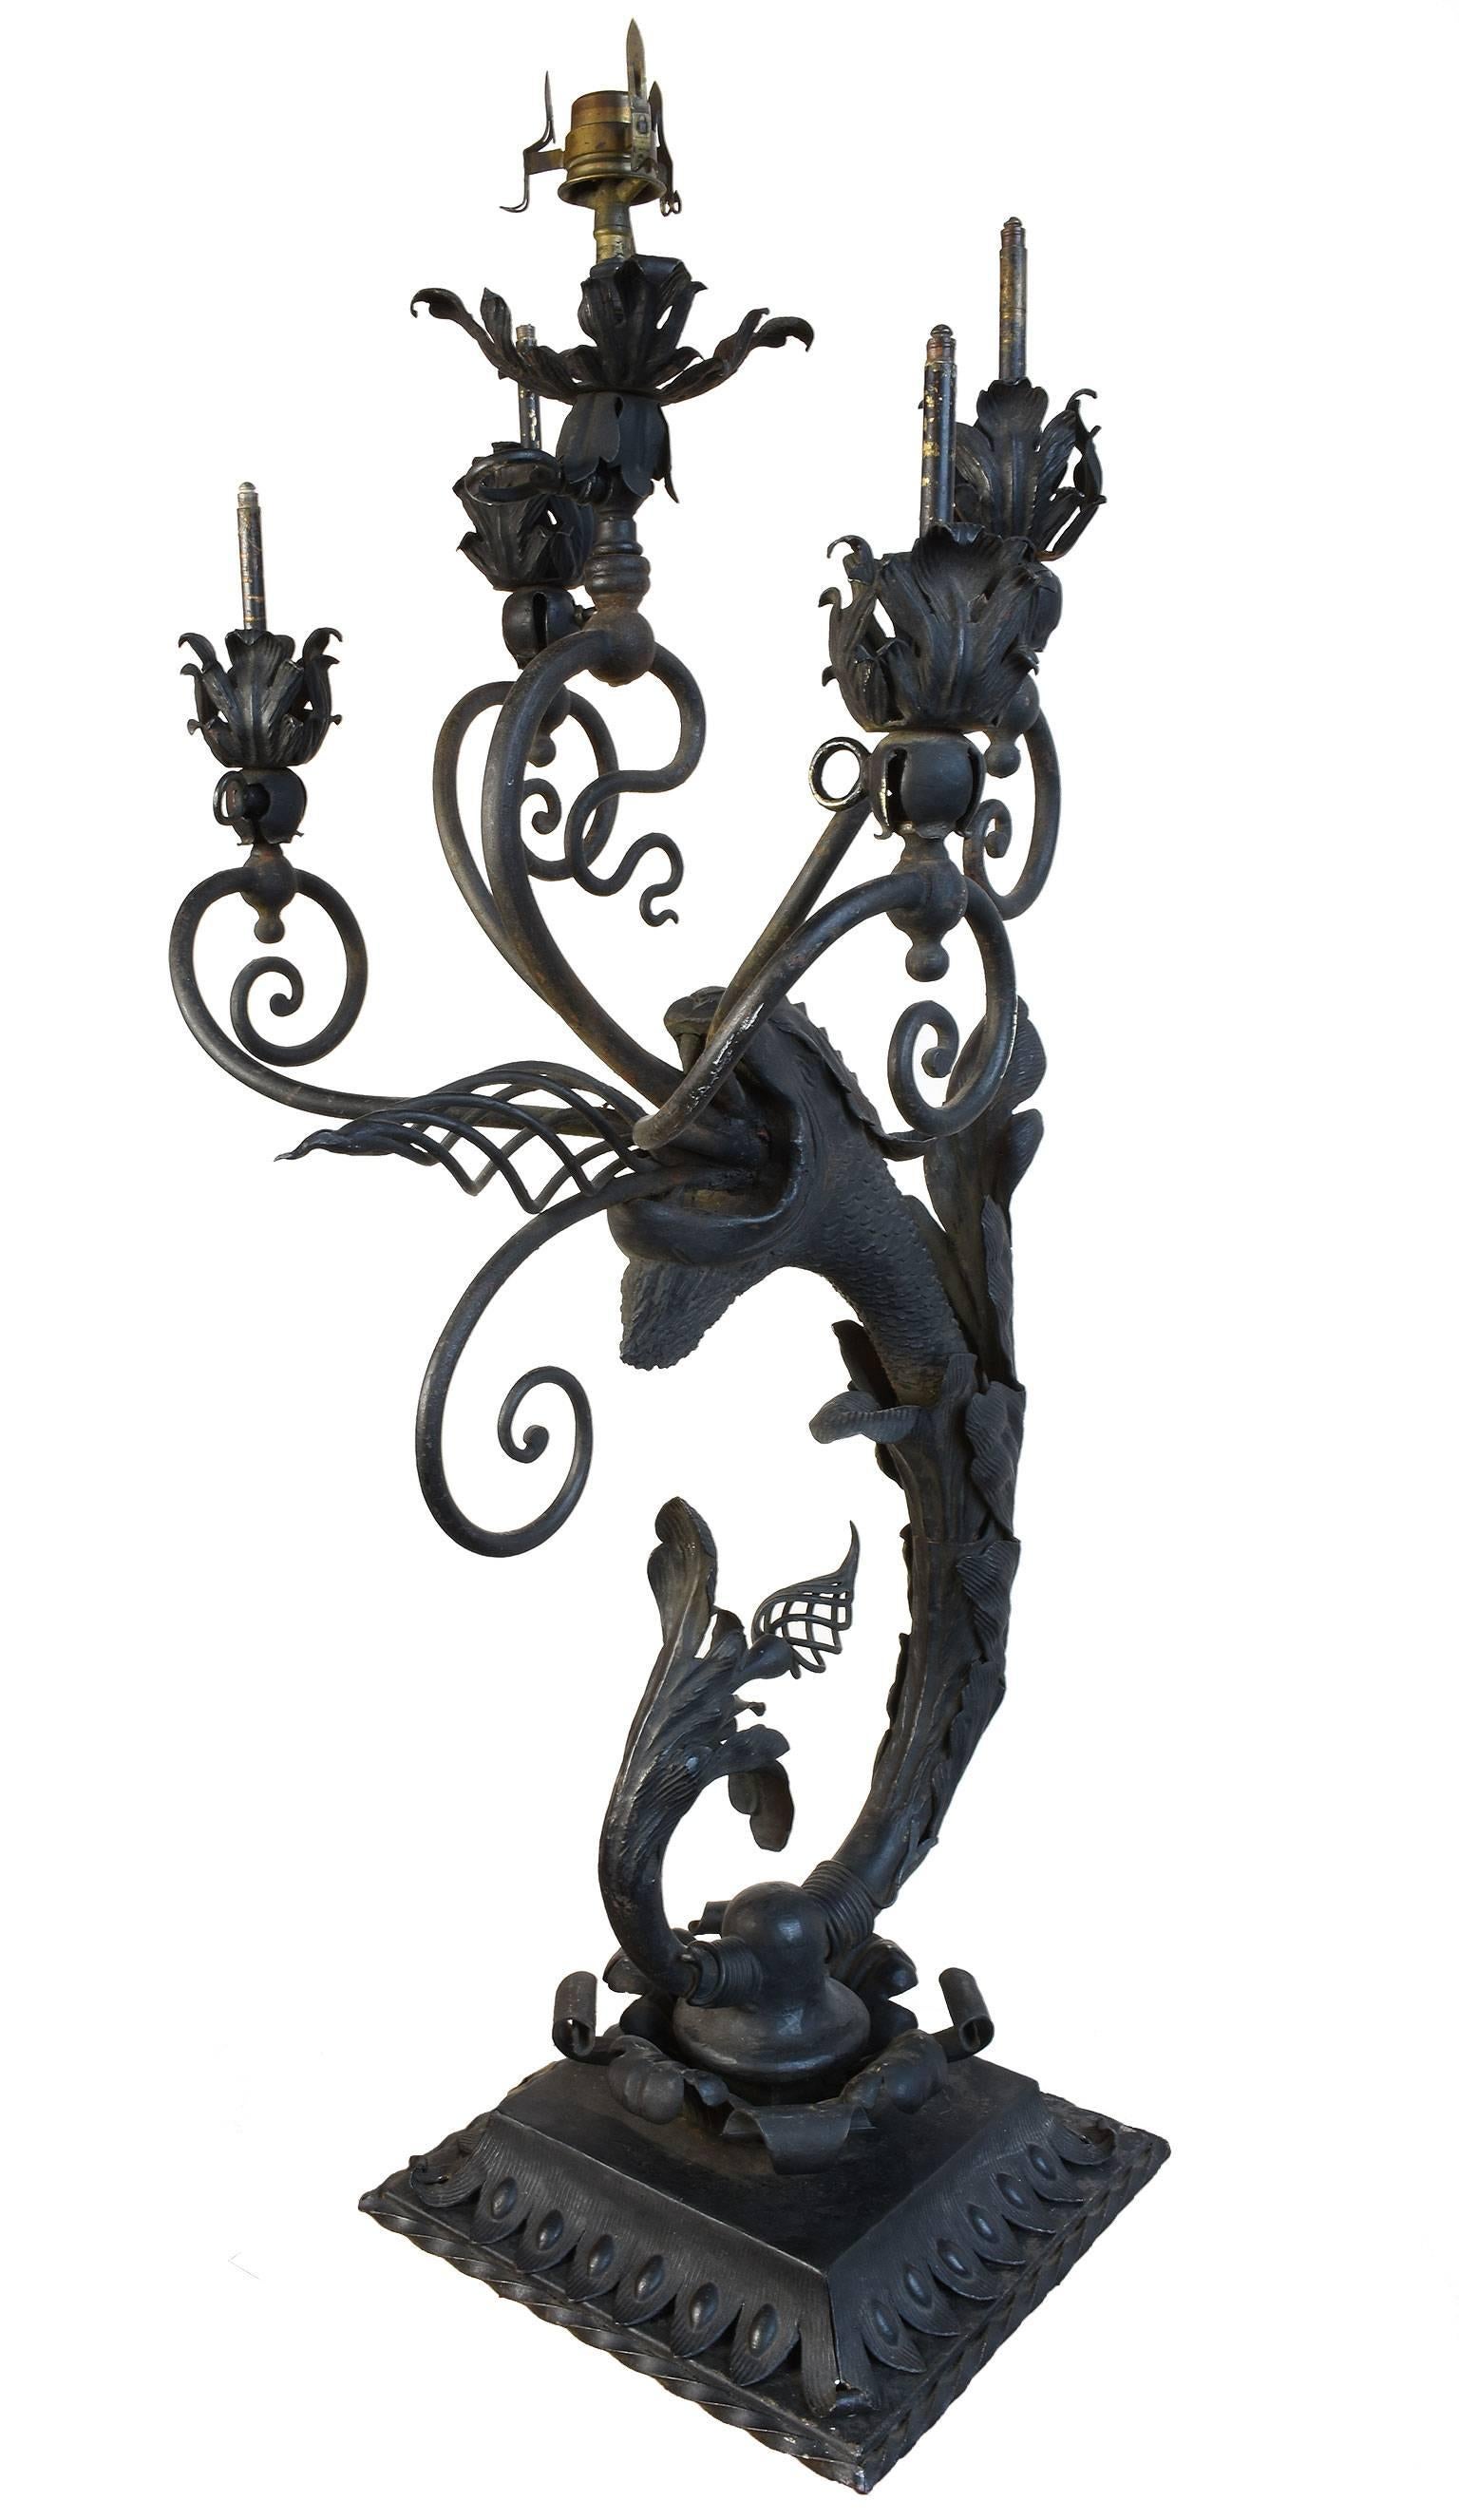 This is a rare Victorian newel post light that is created to look like a 'fire breathing dragon'. Its casting is magnificent and magical! This fixture comes complete with its original cast iron base, five gas burners, and whimsical acanthus leaf and